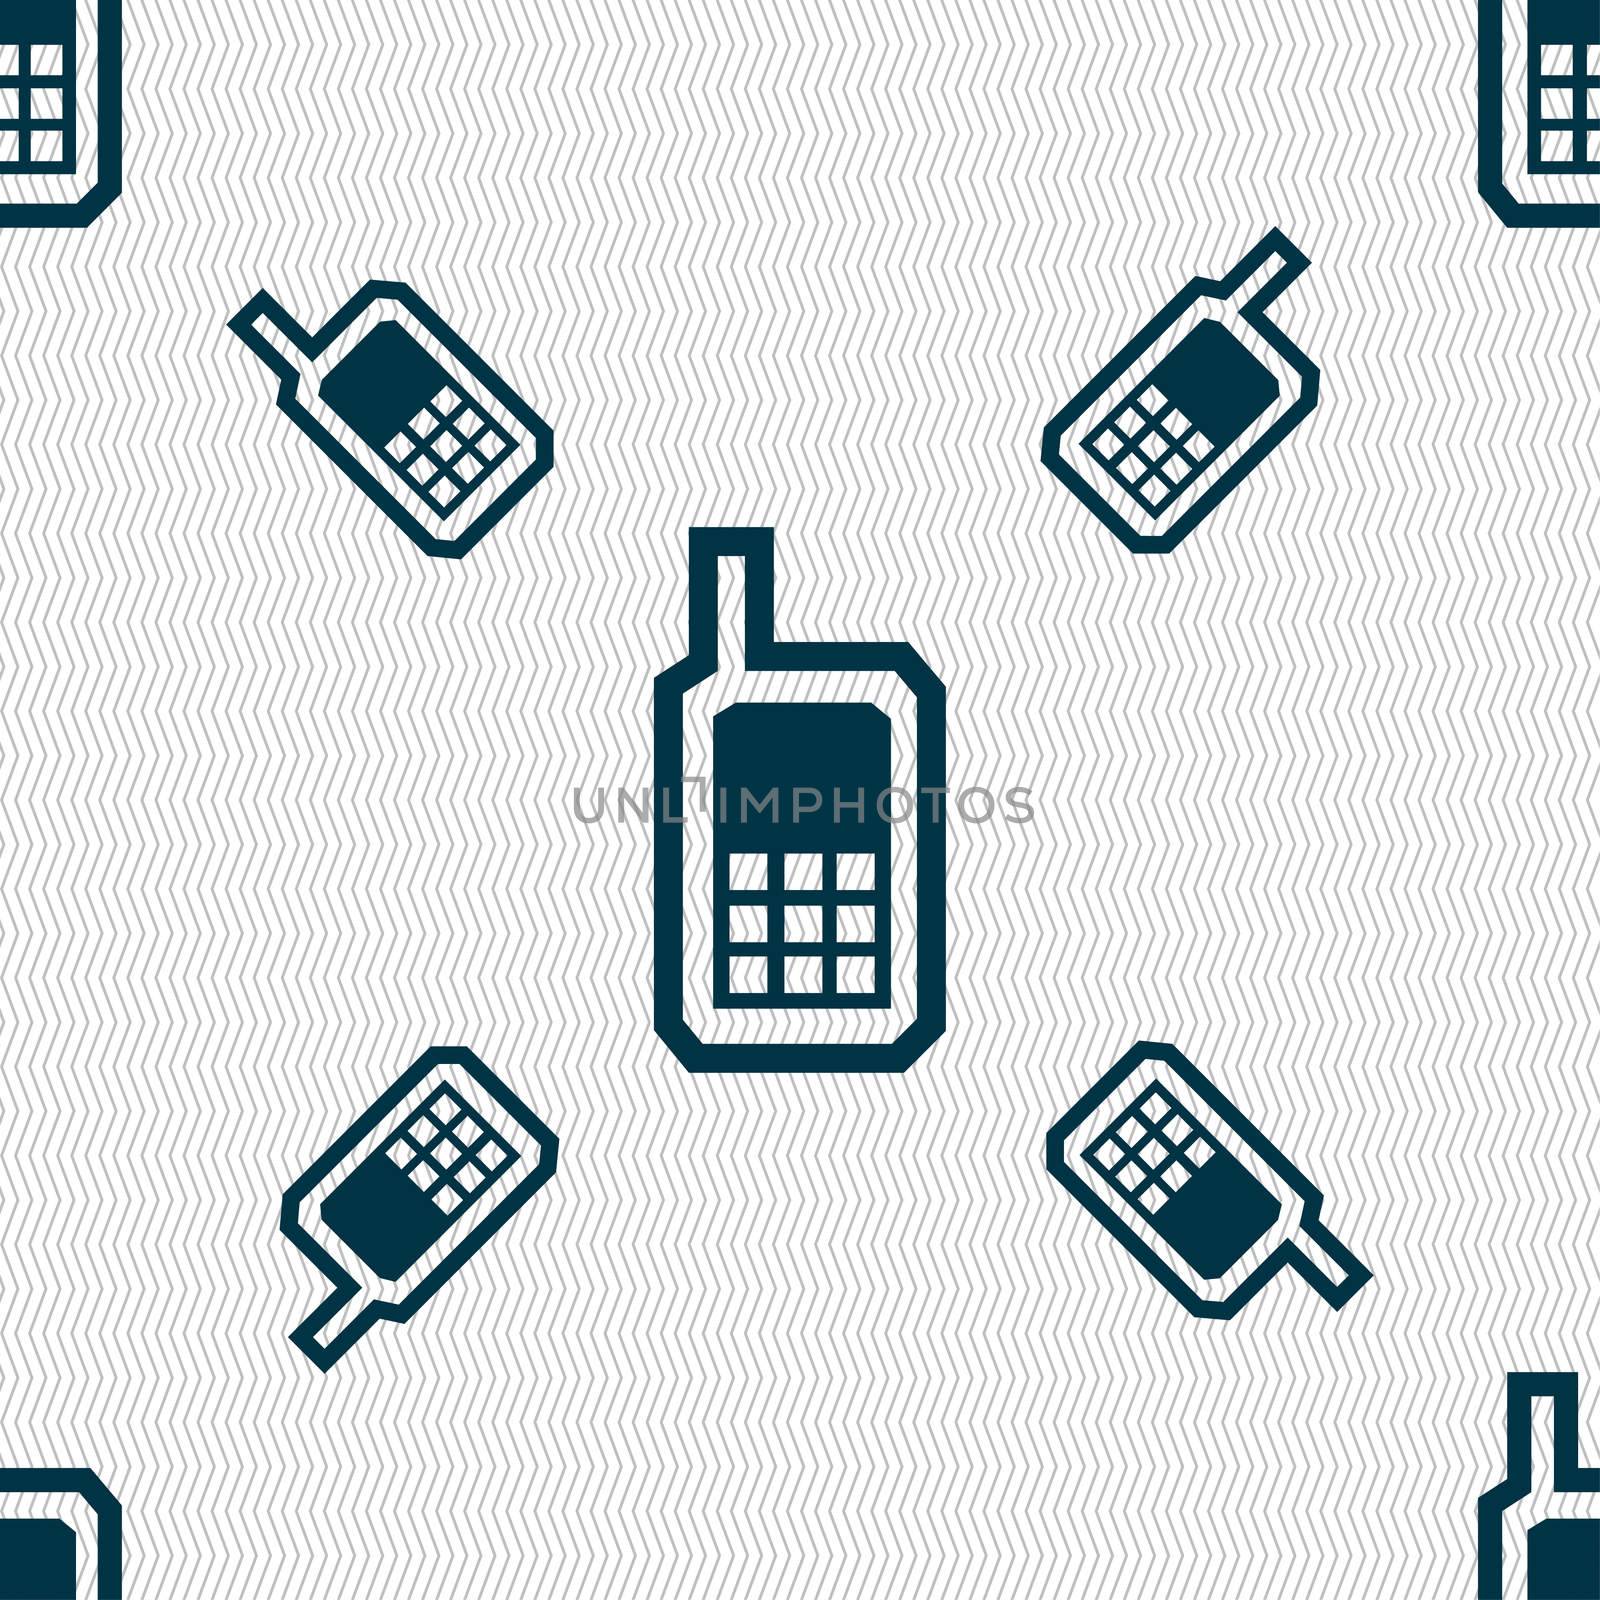 Mobile phone icon sign. Seamless pattern with geometric texture. illustration